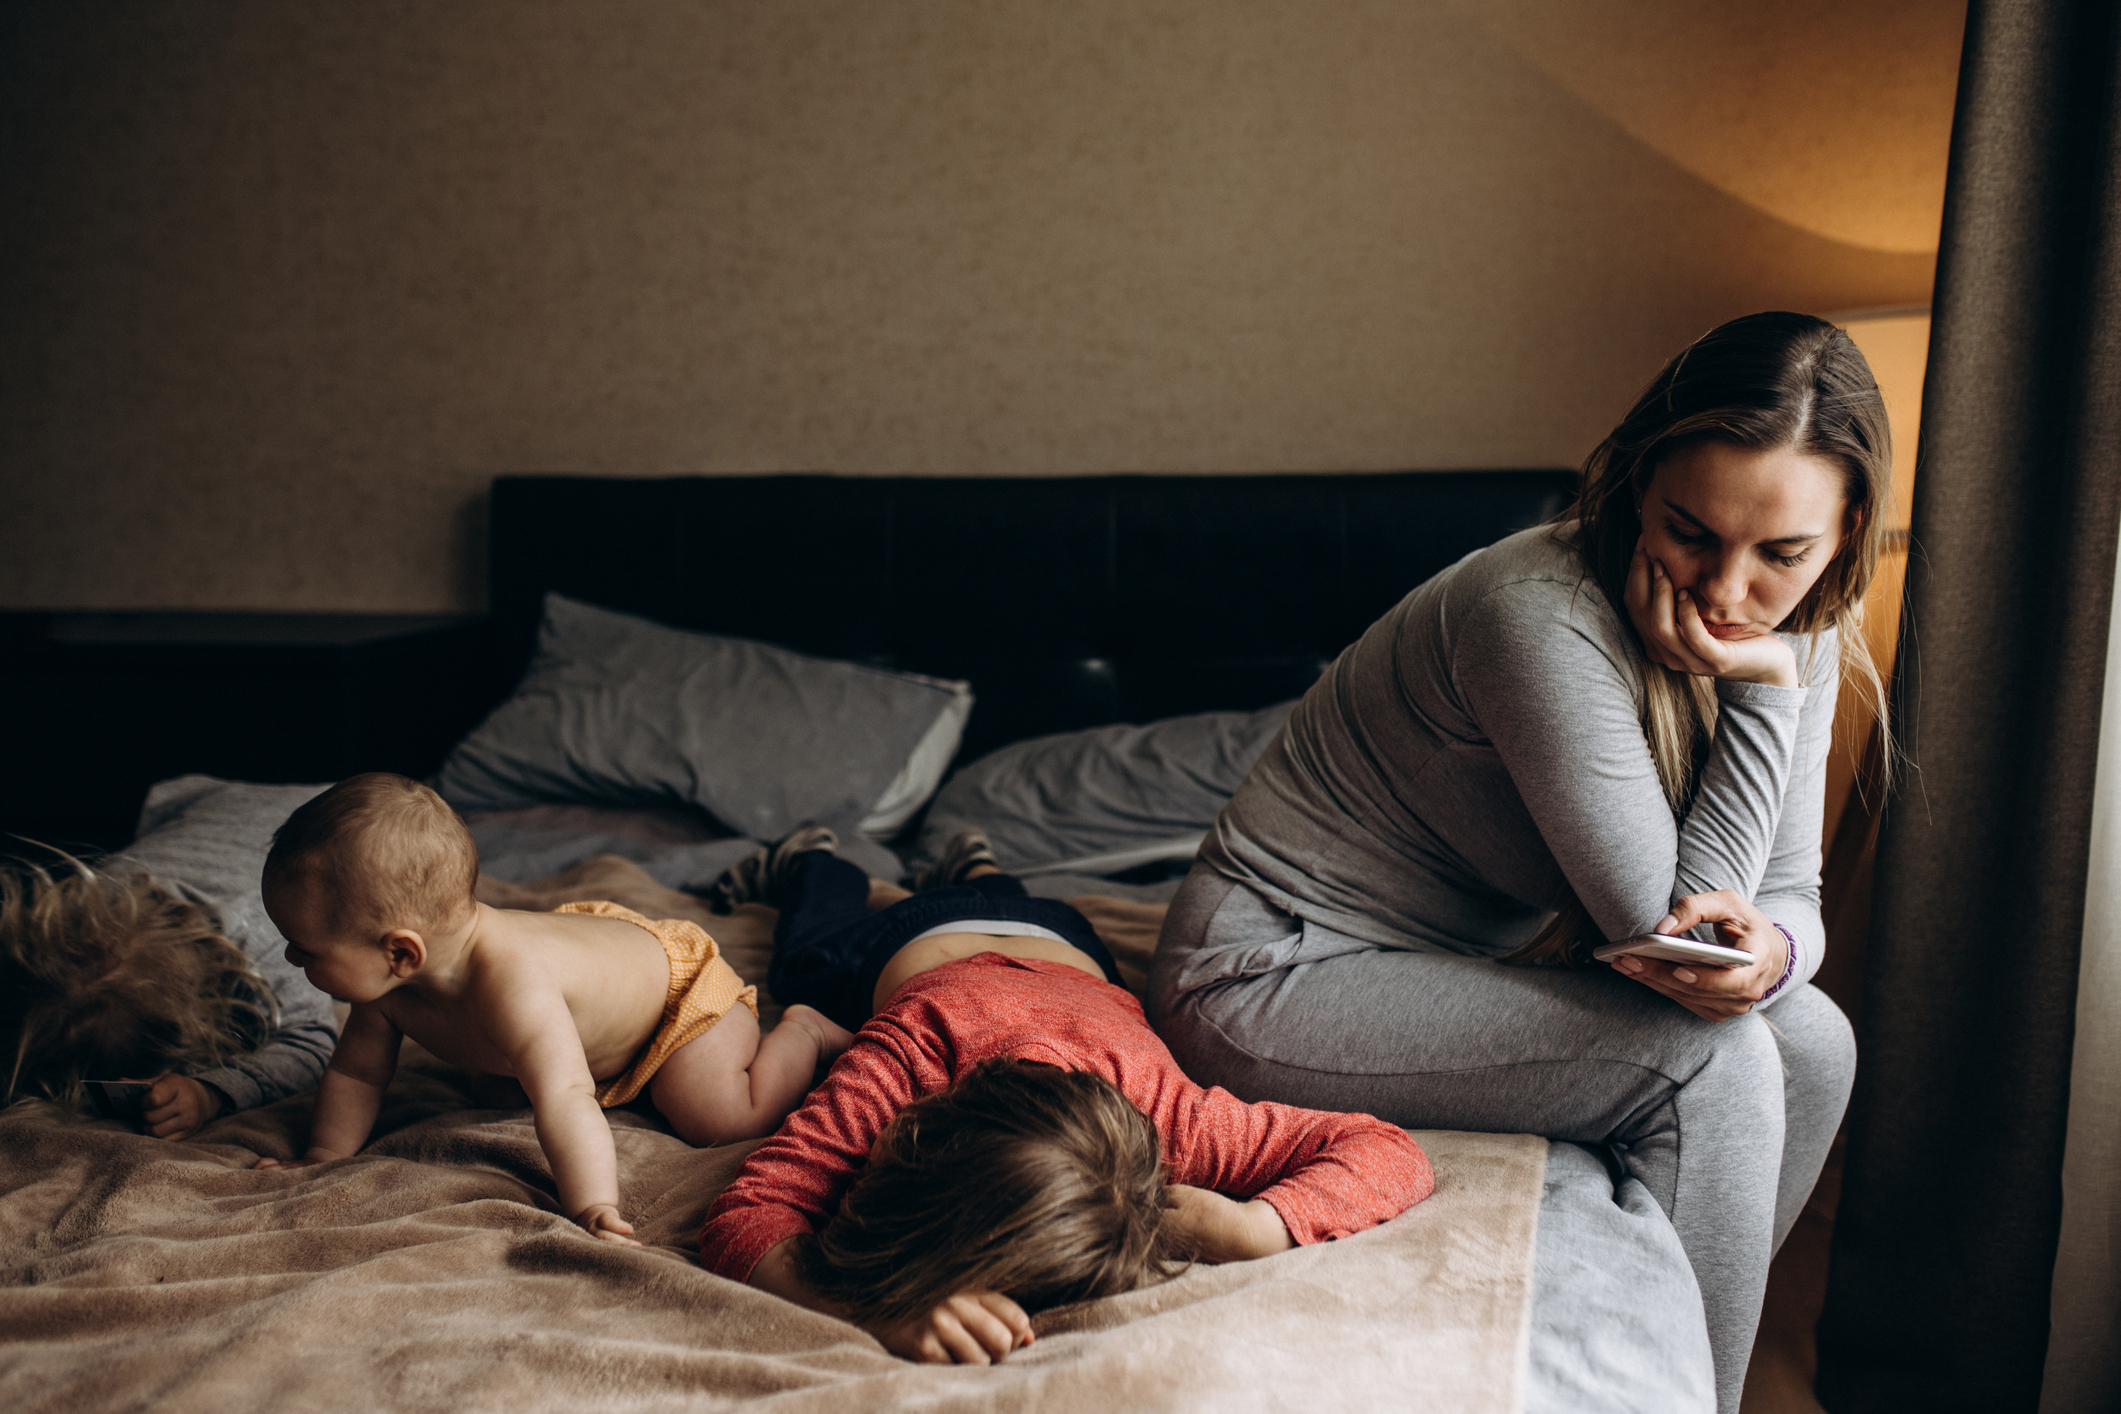 A woman in casual clothing looks at her phone while sitting on a bed. Two young children, one crawling and one lying down, are on the bed beside her